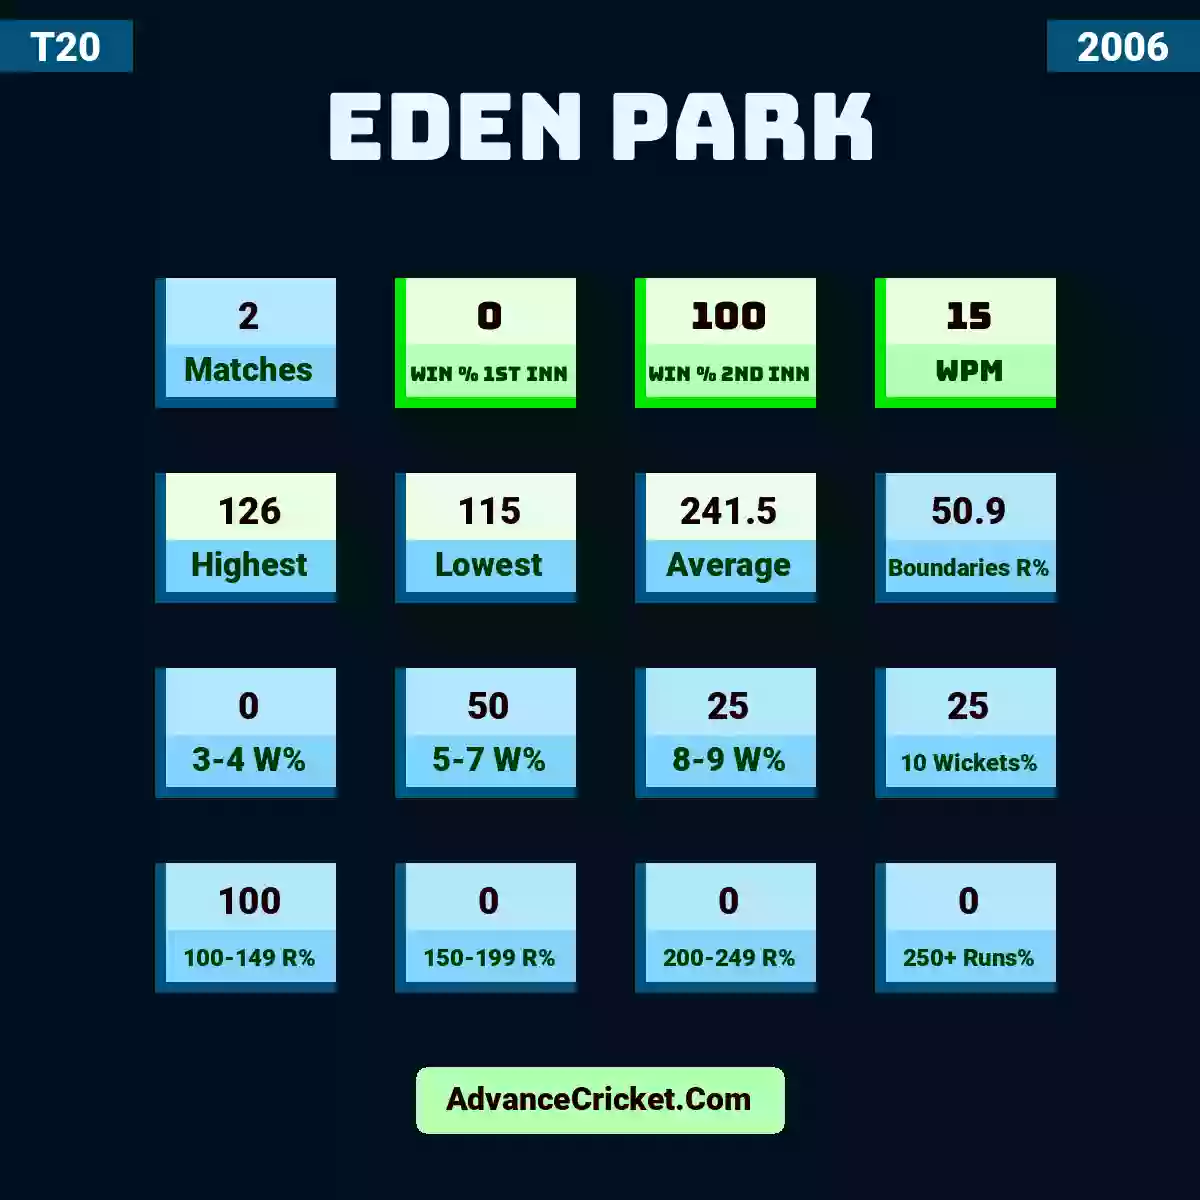 Image showing Eden Park with Matches: 2, Win % 1st Inn: 0, Win % 2nd Inn: 100, WPM: 15, Highest: 126, Lowest: 115, Average: 241.5, Boundaries R%: 50.9, 3-4 W%: 0, 5-7 W%: 50, 8-9 W%: 25, 10 Wickets%: 25, 100-149 R%: 100, 150-199 R%: 0, 200-249 R%: 0, 250+ Runs%: 0.